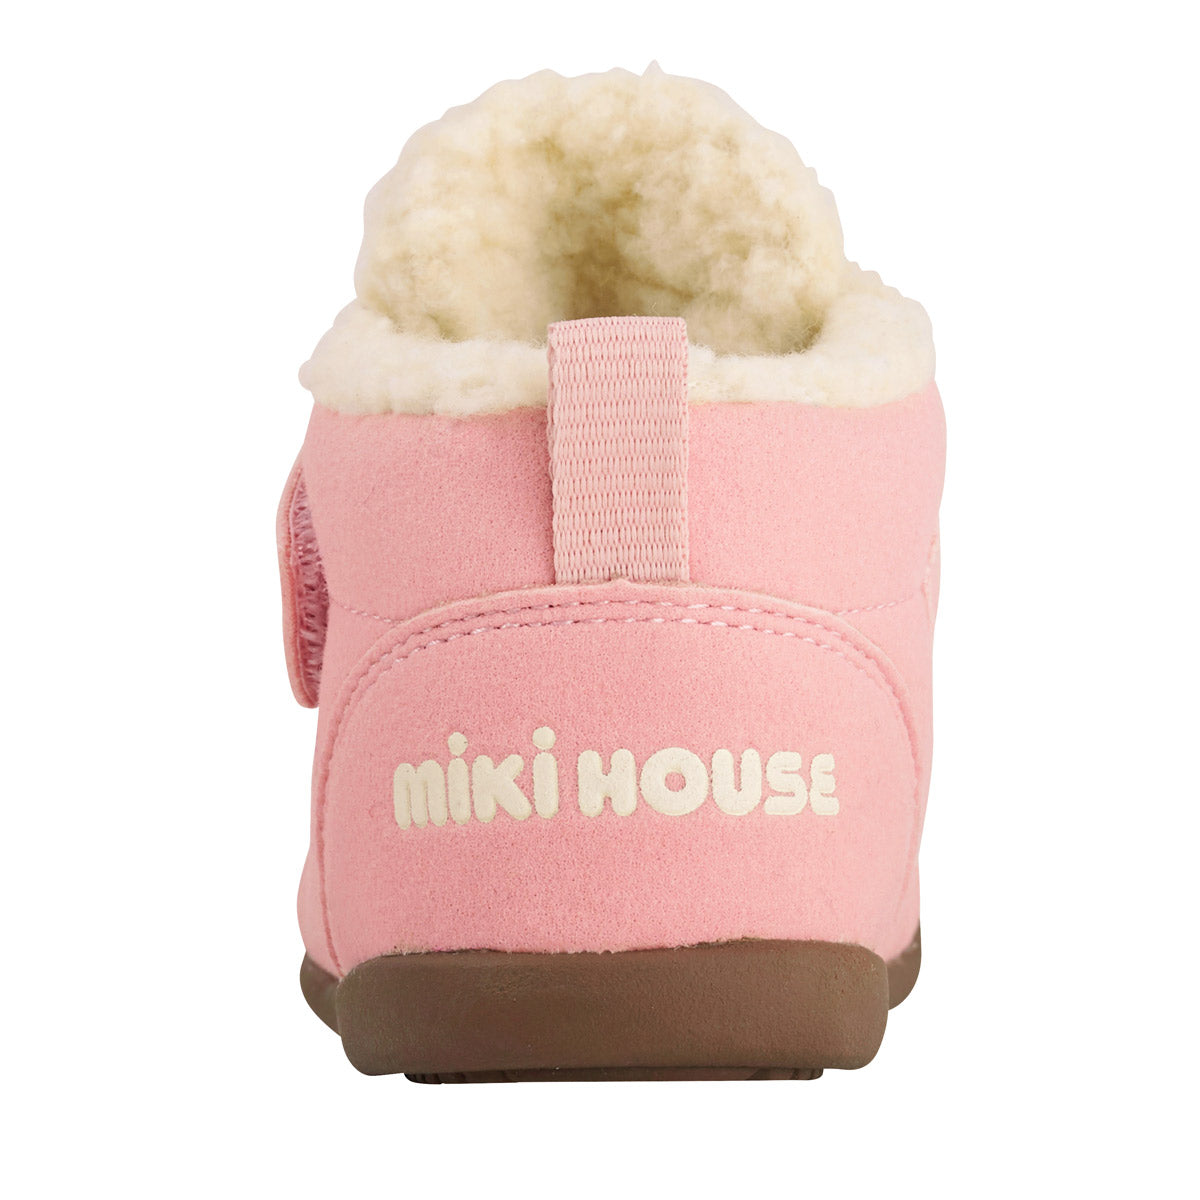 baby sherpa boots